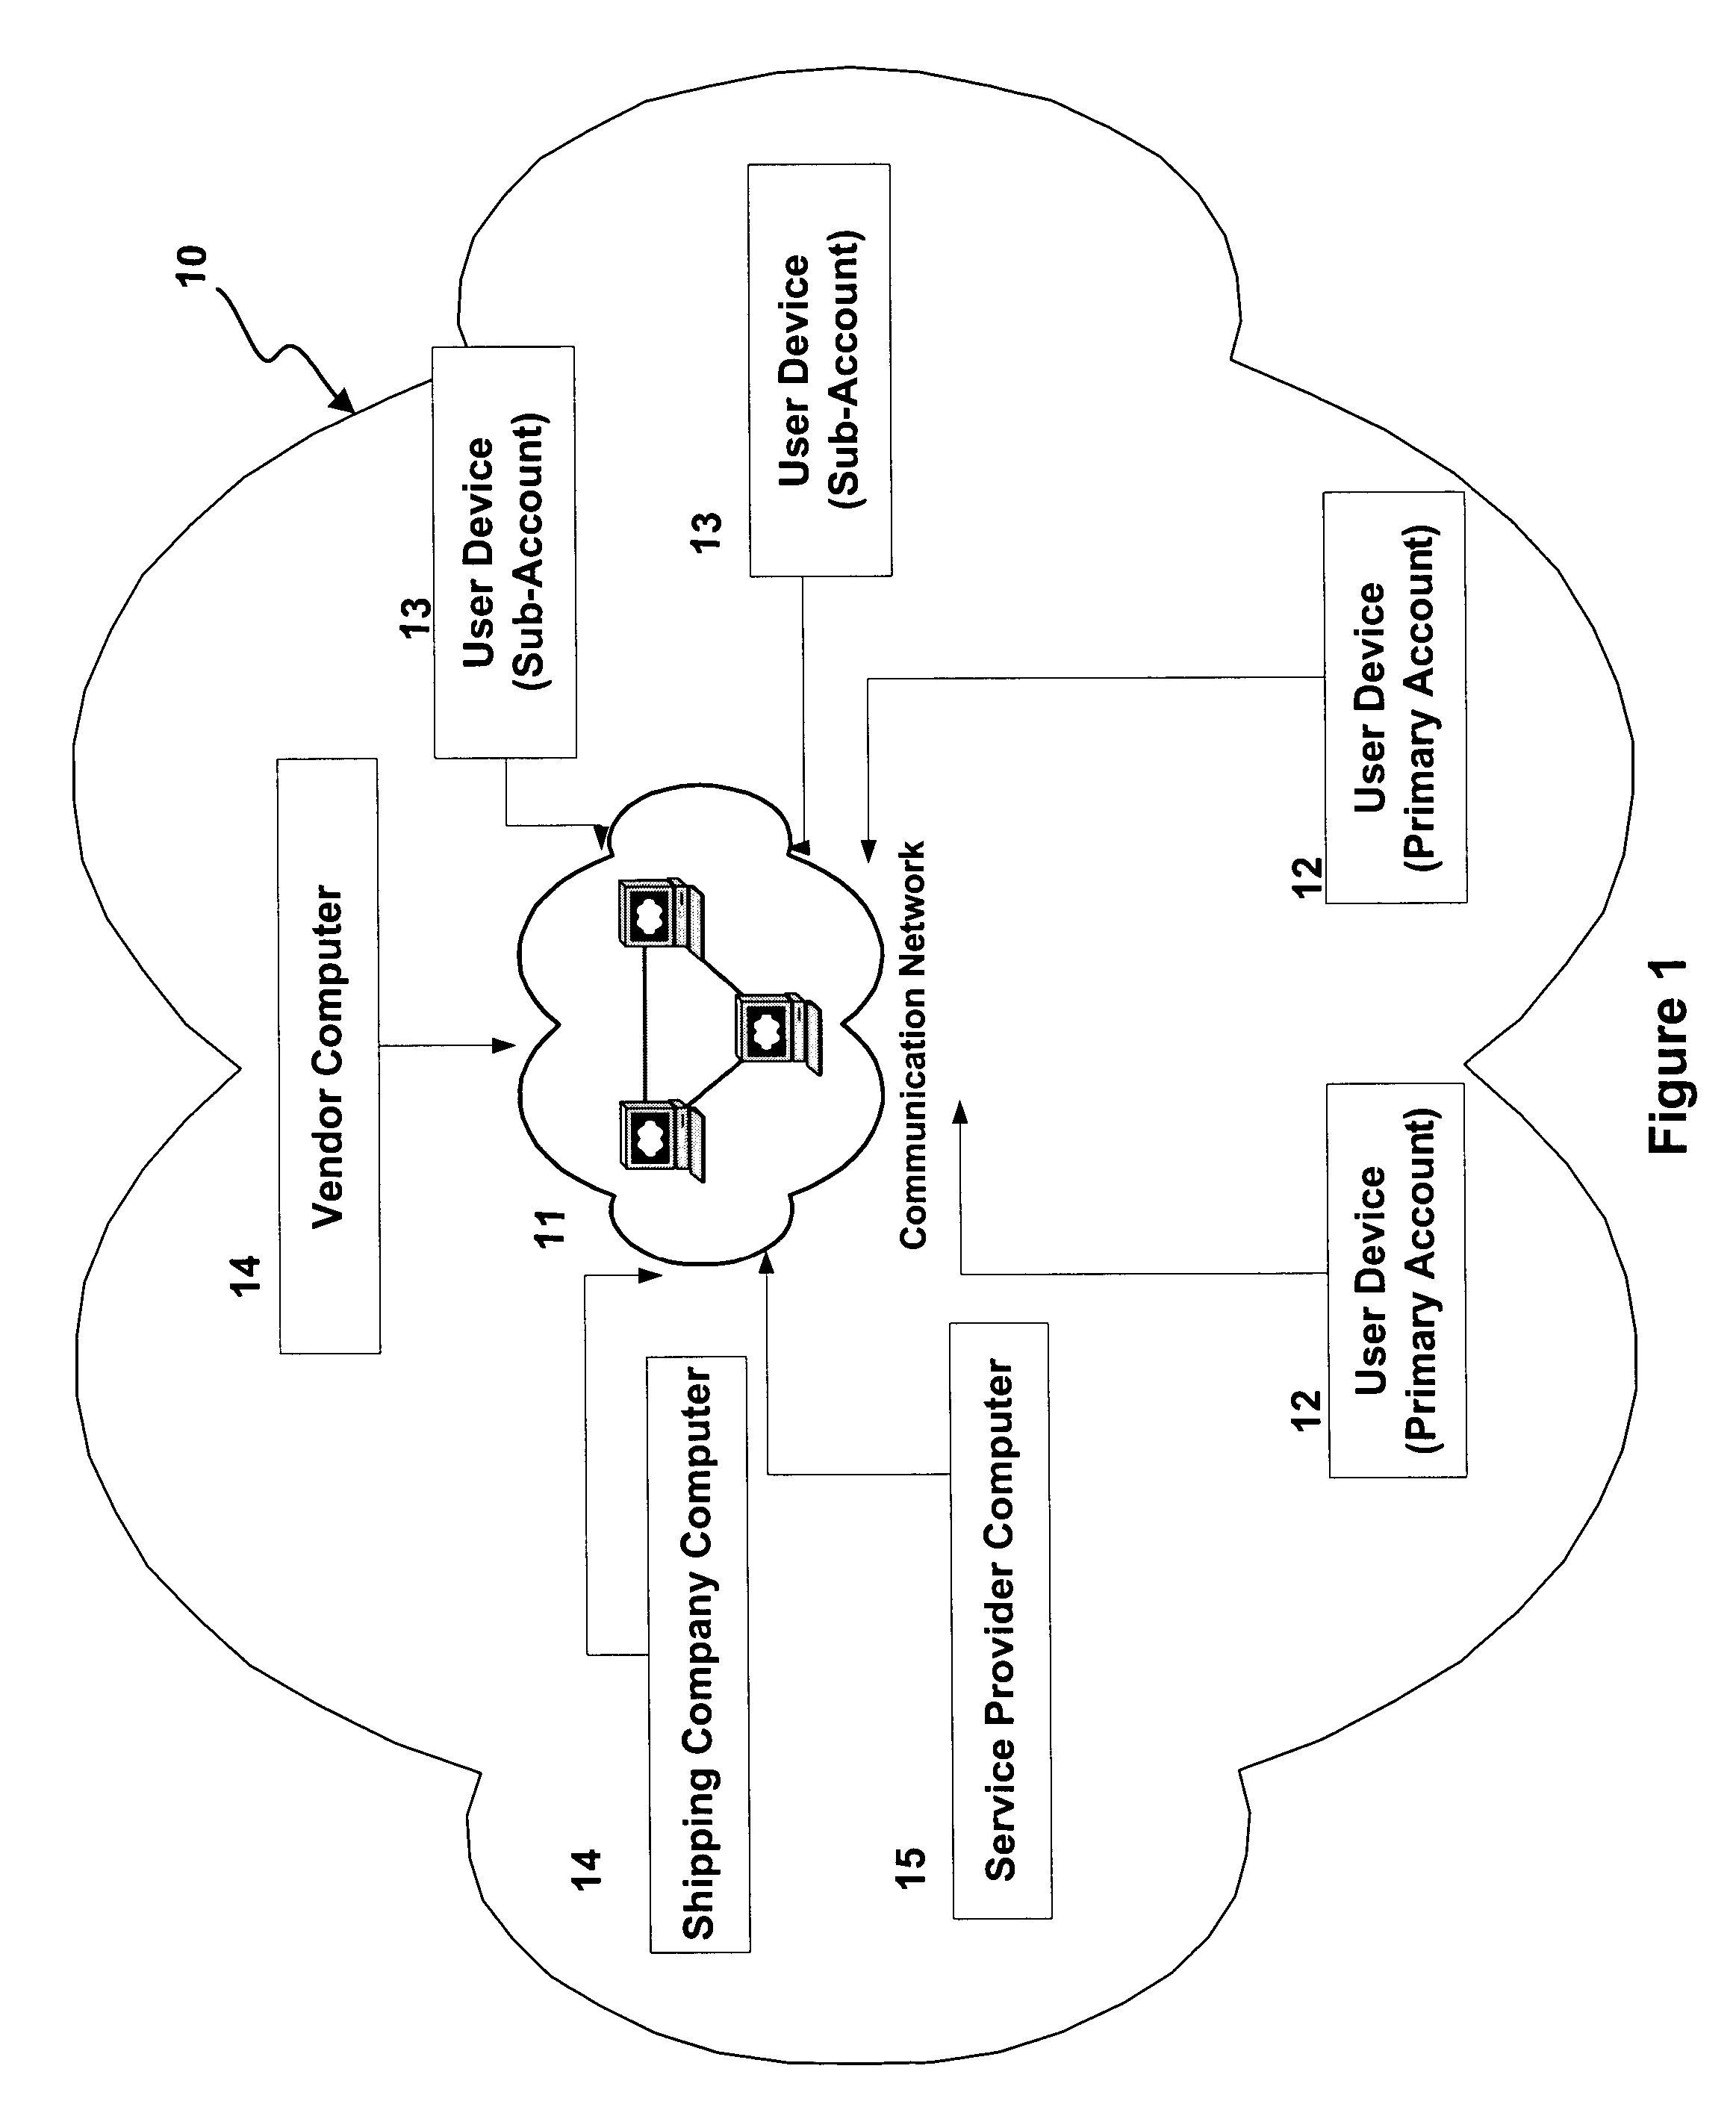 Methods and apparatus for transacting electronic commerce using account hierarchy and locking of accounts